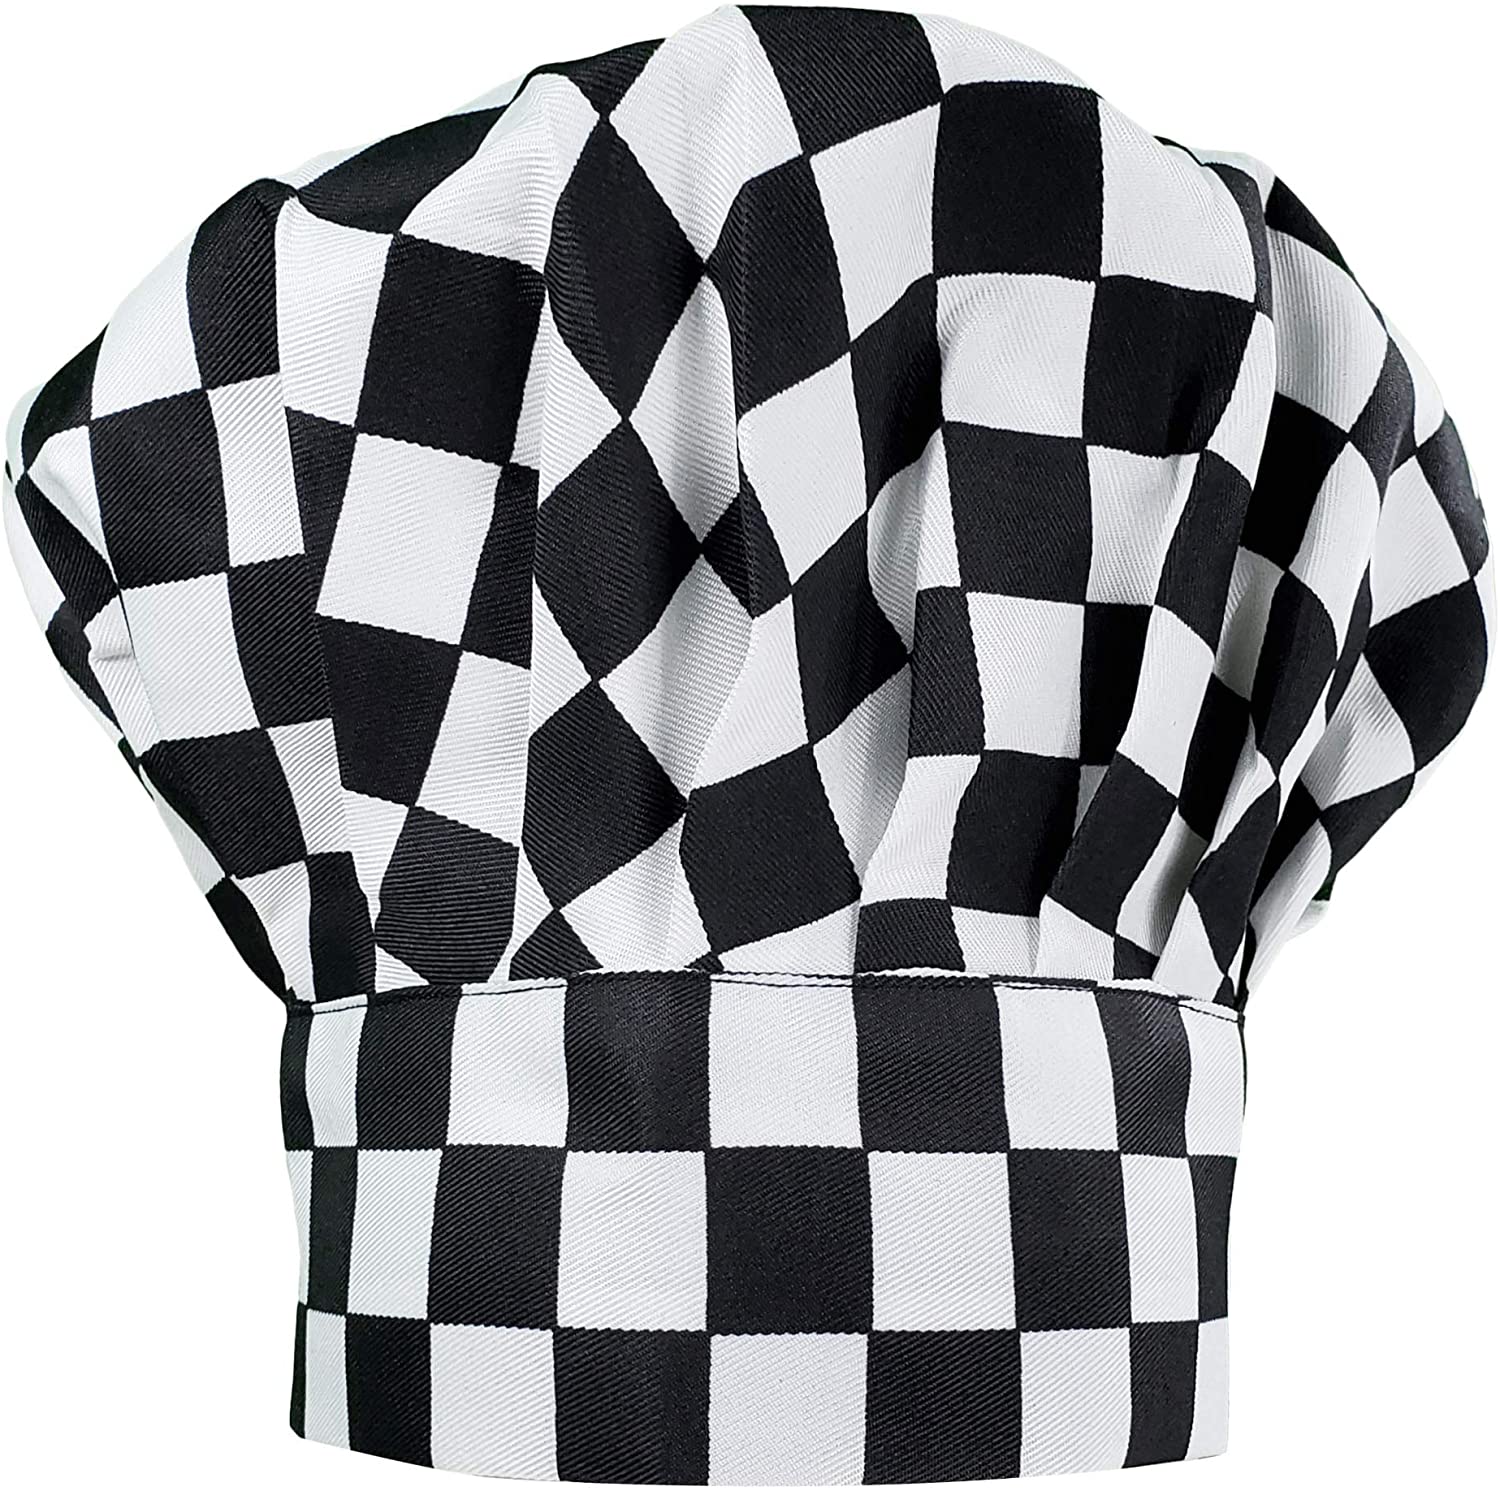 6 Pack Chef Hat Set Elastic Baker Kitchen Catering Cooking Chefs Hats